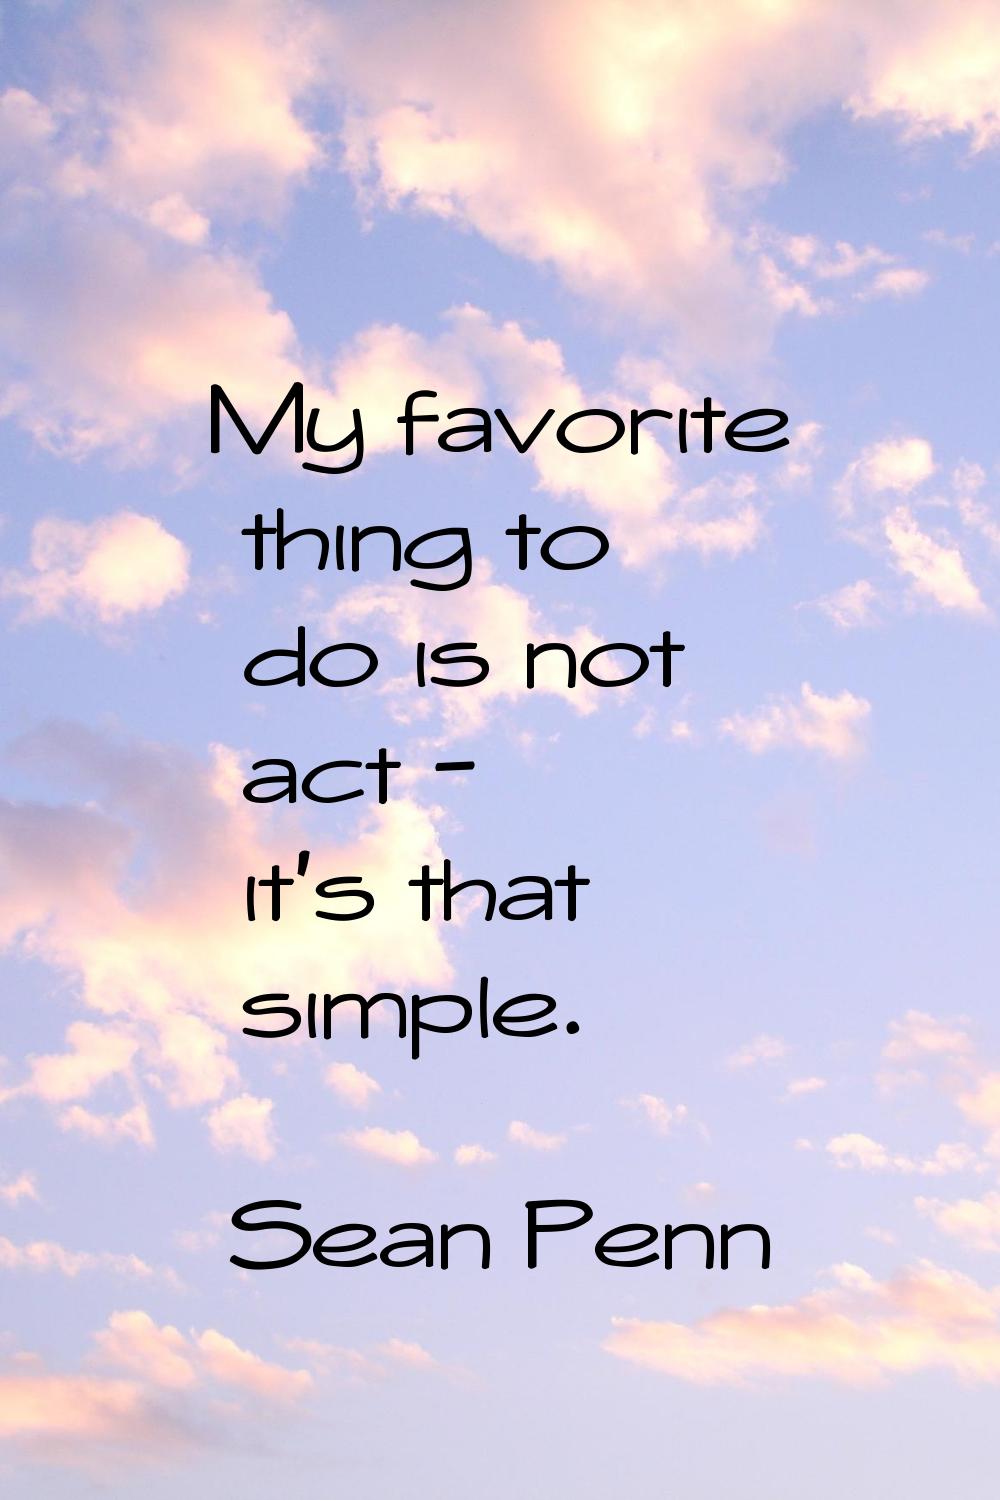 My favorite thing to do is not act - it's that simple.